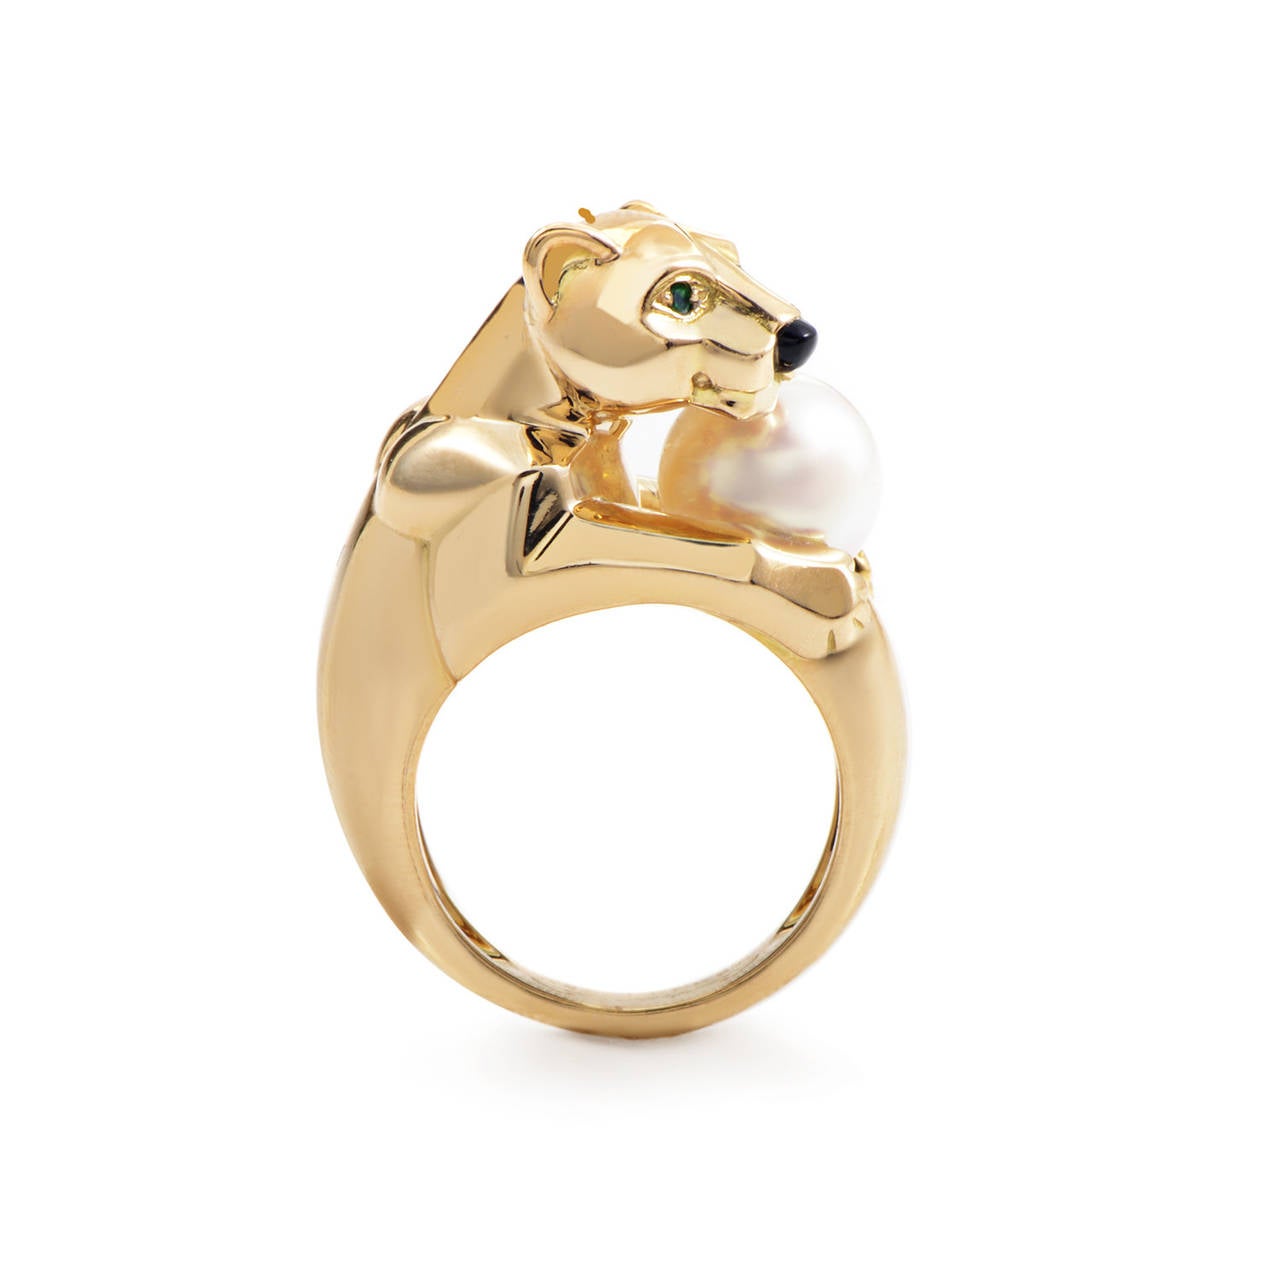 The Cartier Panthere collection is well known for its bold design that all feature panther motifs. The ring is made of 18K yellow gold and boasts a panther-shaped motif with green emerald eyes, an onyx nose, and a pearl clutched in its